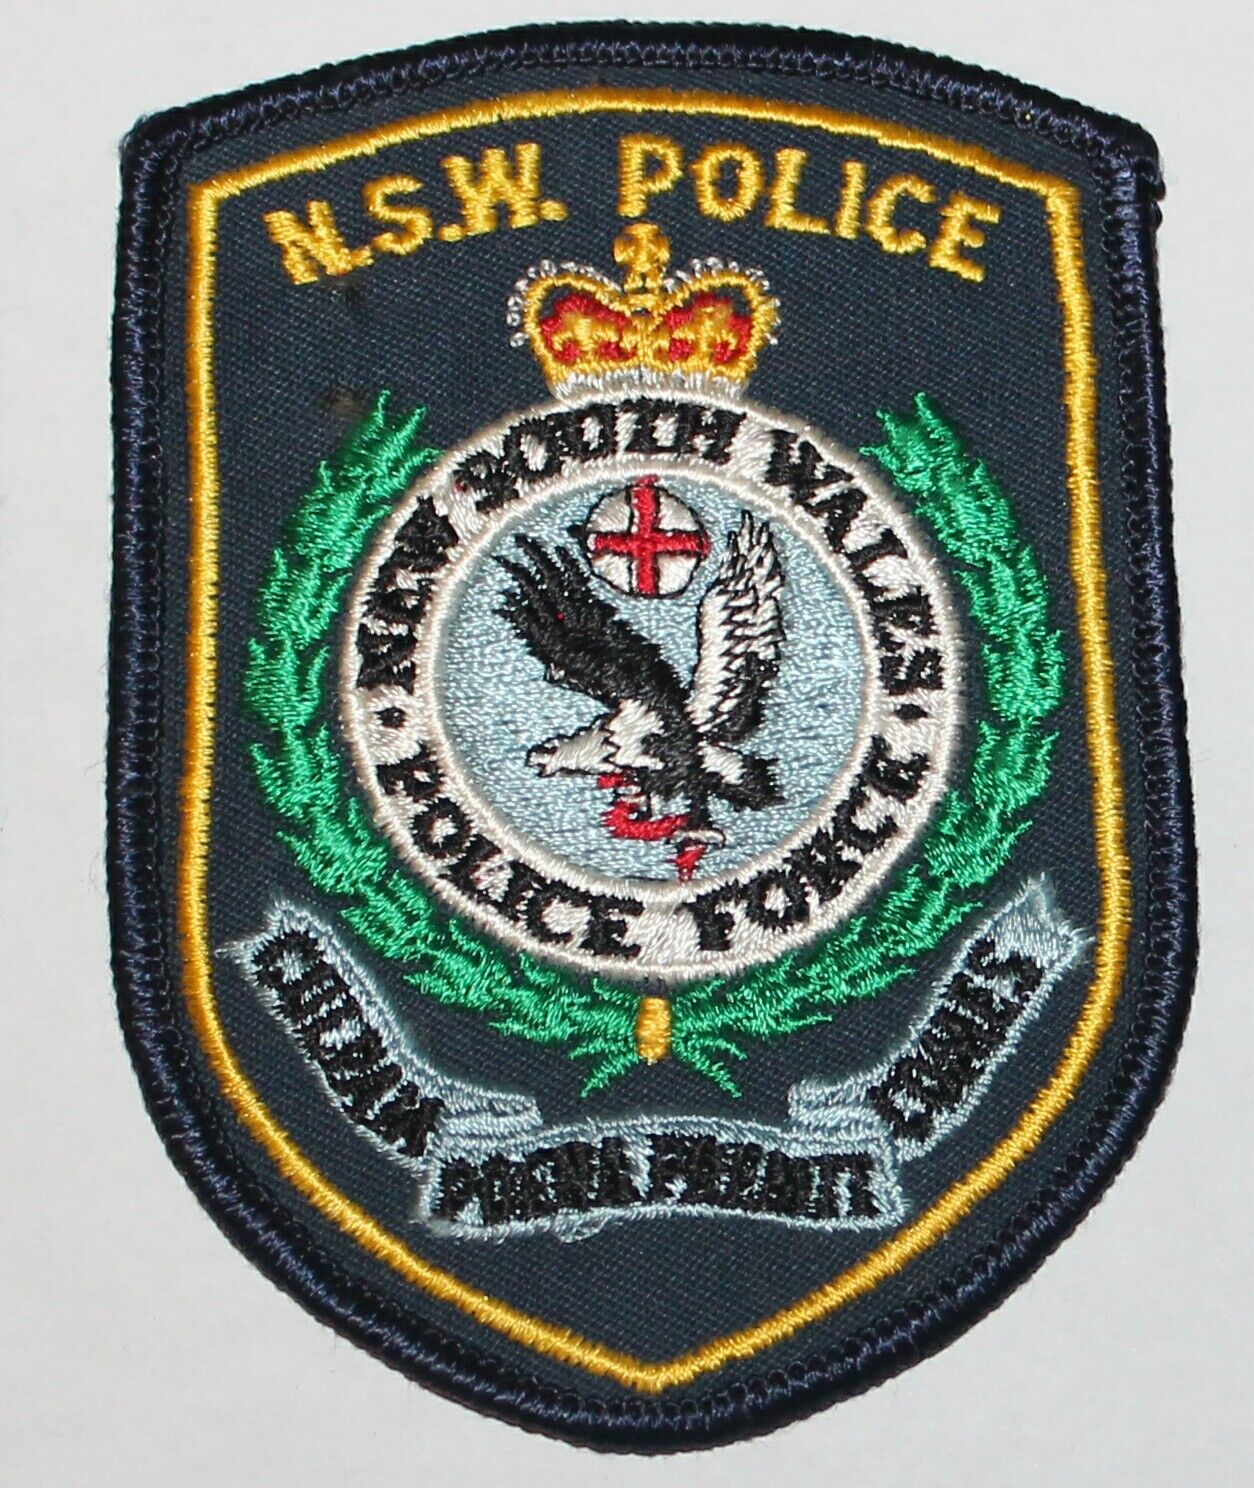 Old AUSTRALIAN POLICE FORCE AU PD Used Worn patch #80